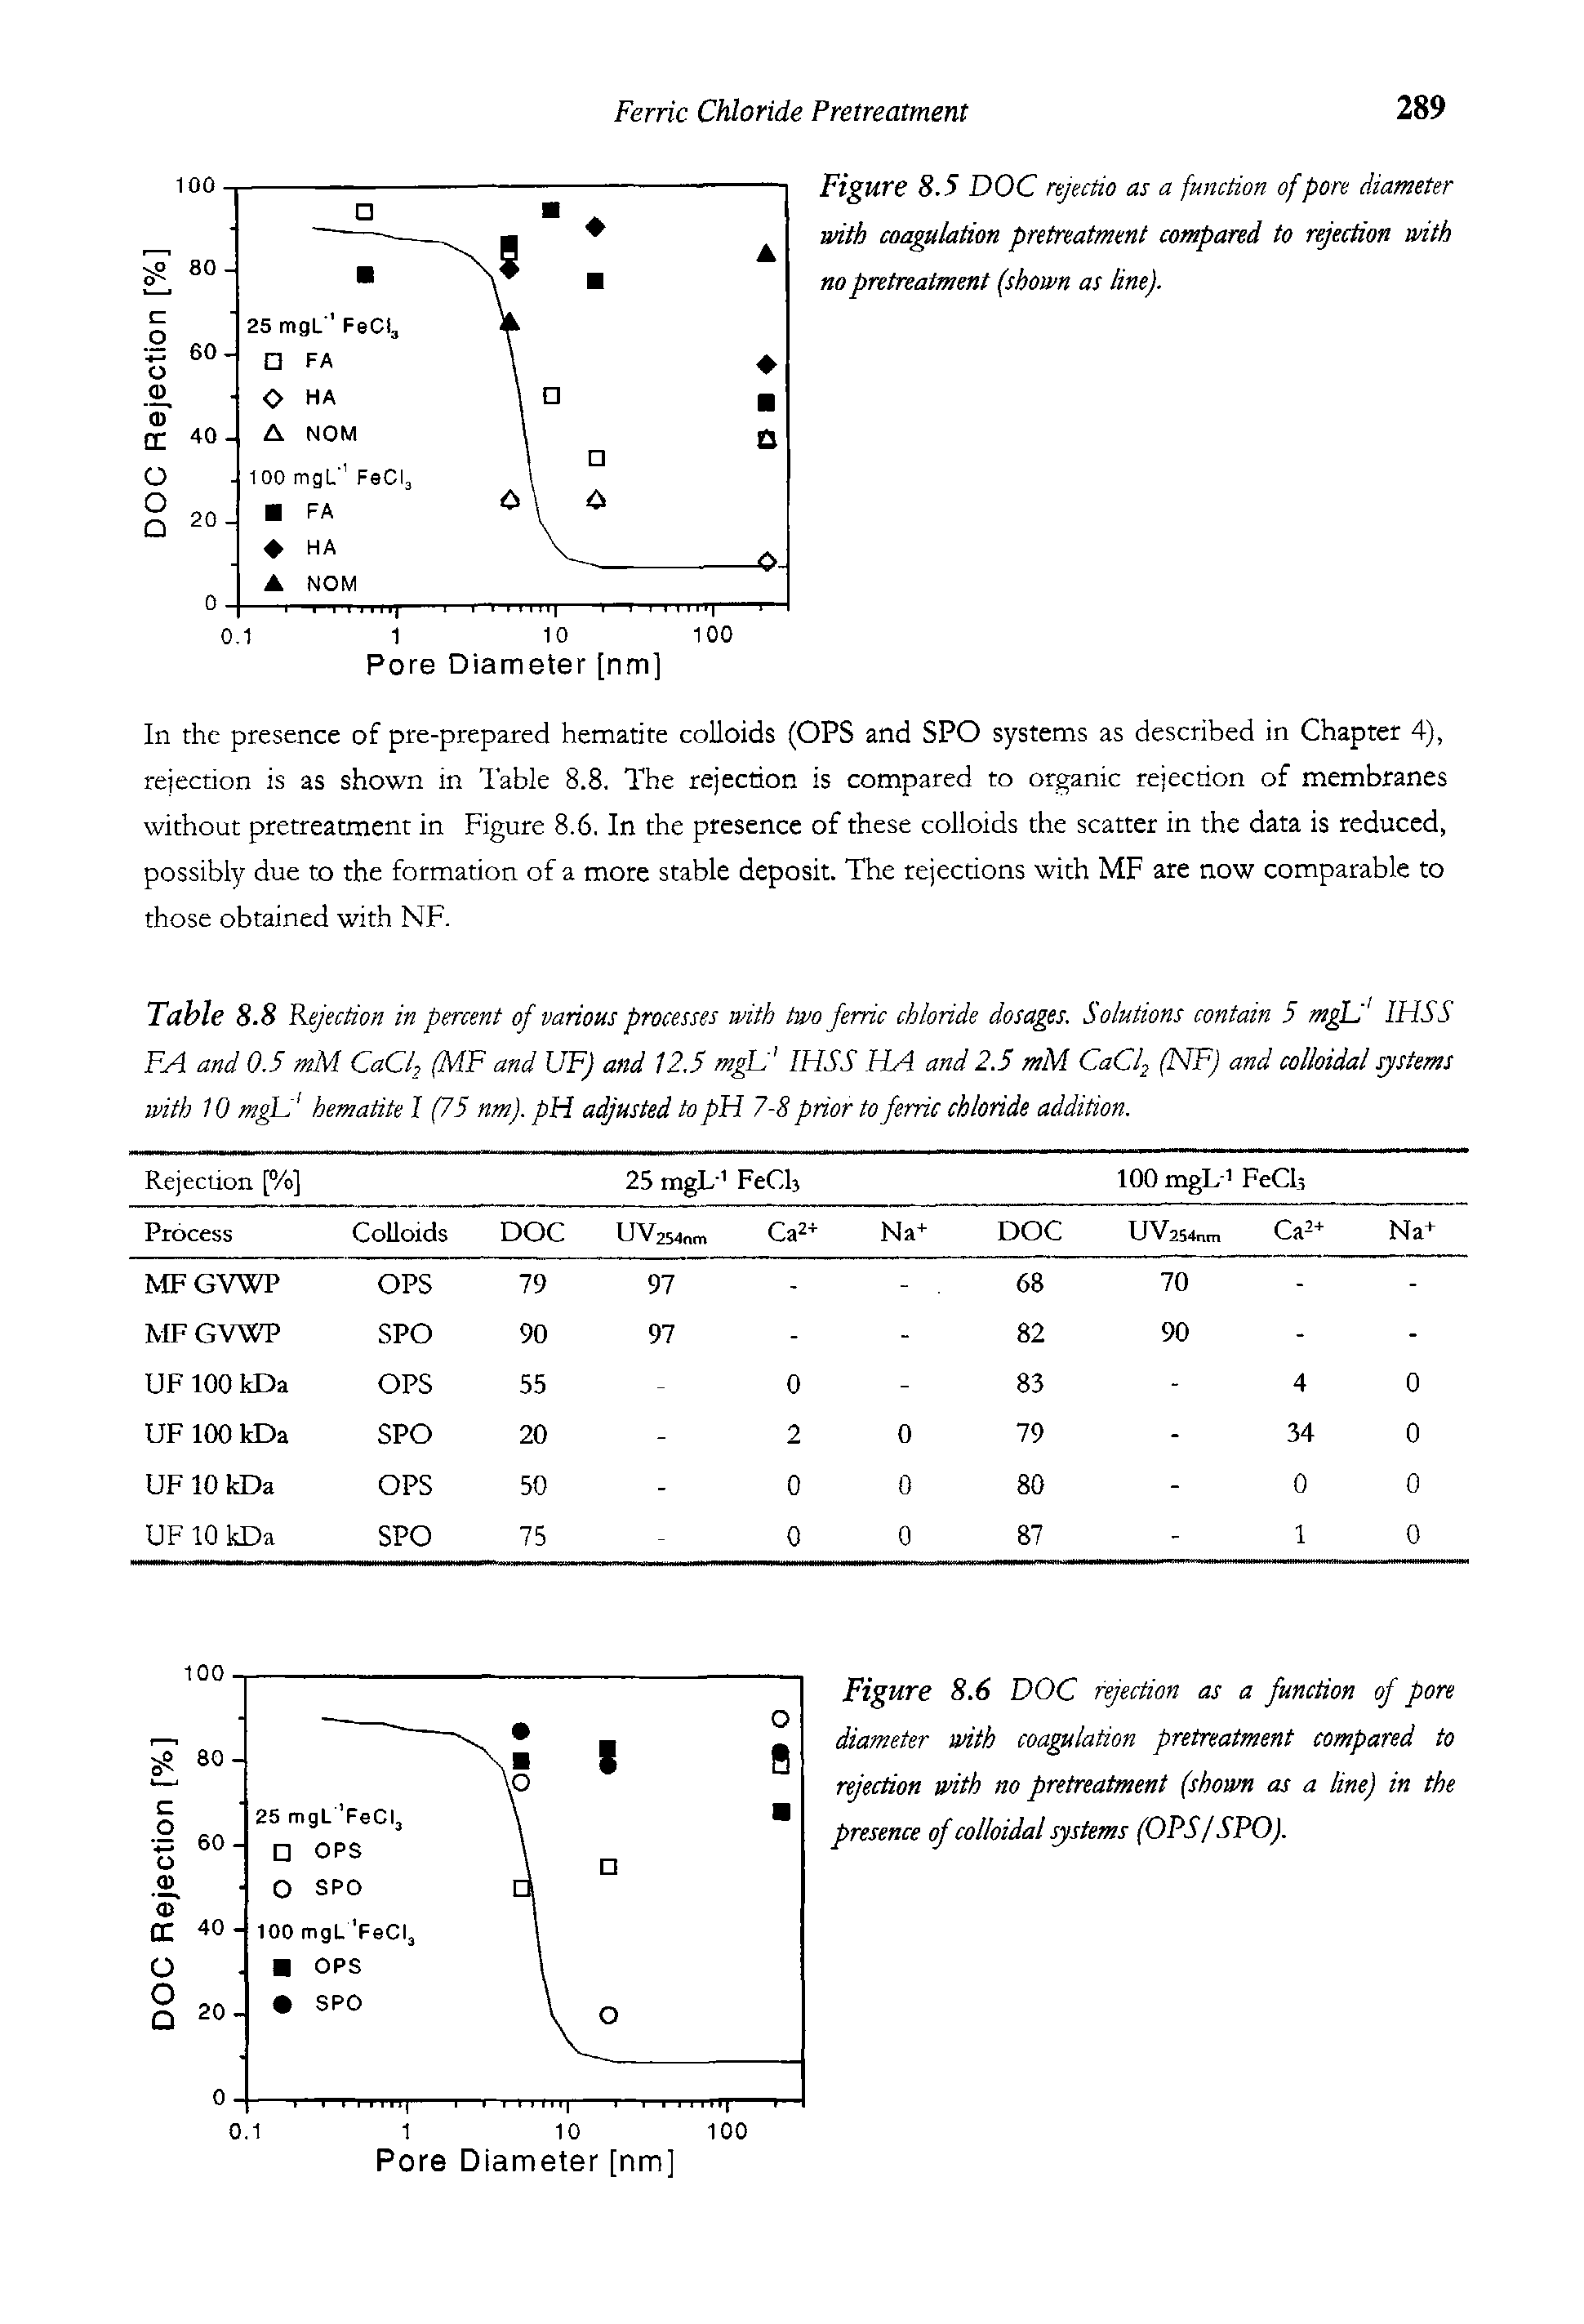 Table 8.8 Rejection in percent of various processes with two ferric chloride dosages. Solutions contain 5 mglj IHSS FA and 0.5 mM CaCl, (MF and UFJ and 12.5 mgL IHSS FLA and 2.5 mM CaCf (NF) and colloidal systems with 10 mgL hematite I (75 nm). pH adjusted to pH 7-8 prior to ferric chloride addition.